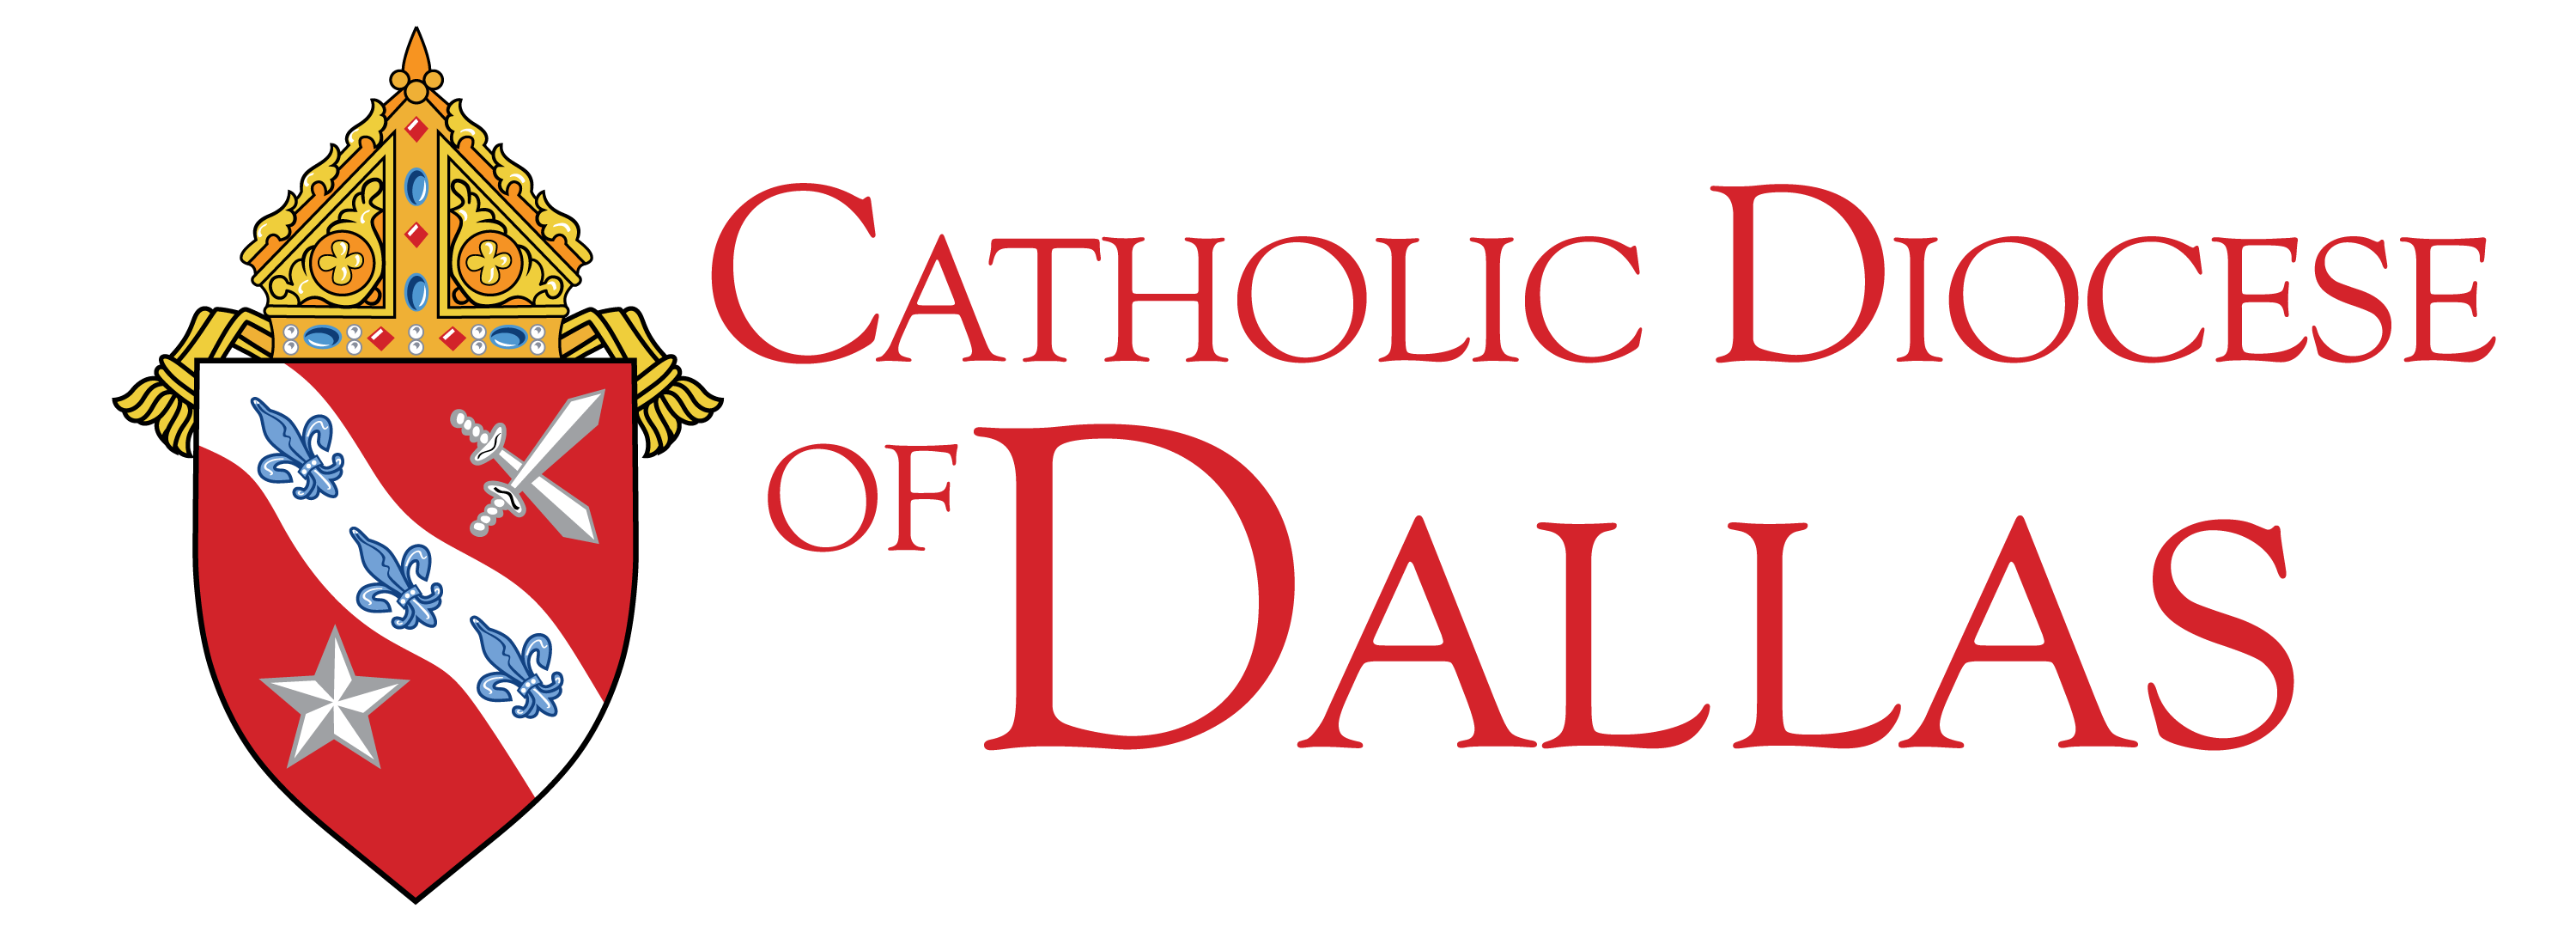 Catholic Diocese of Dallas - red letter